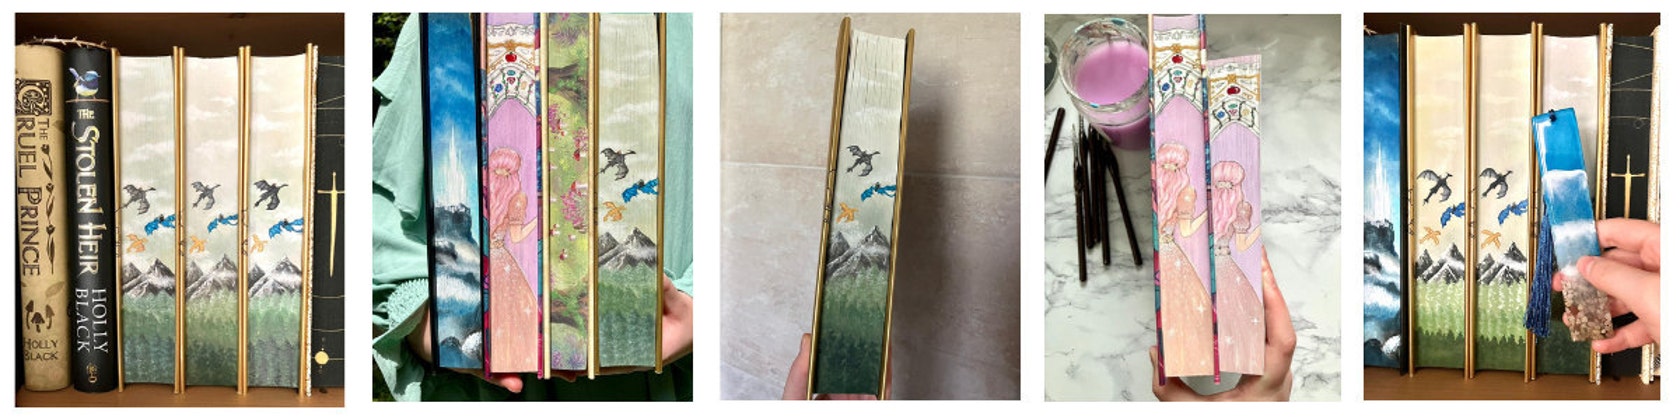 Babel Painted Edges Fore-edge Painting Hand-painted Book Book Lovers Tiktok  painted Pages Painted Book Edges R F Kuang Rebecca 